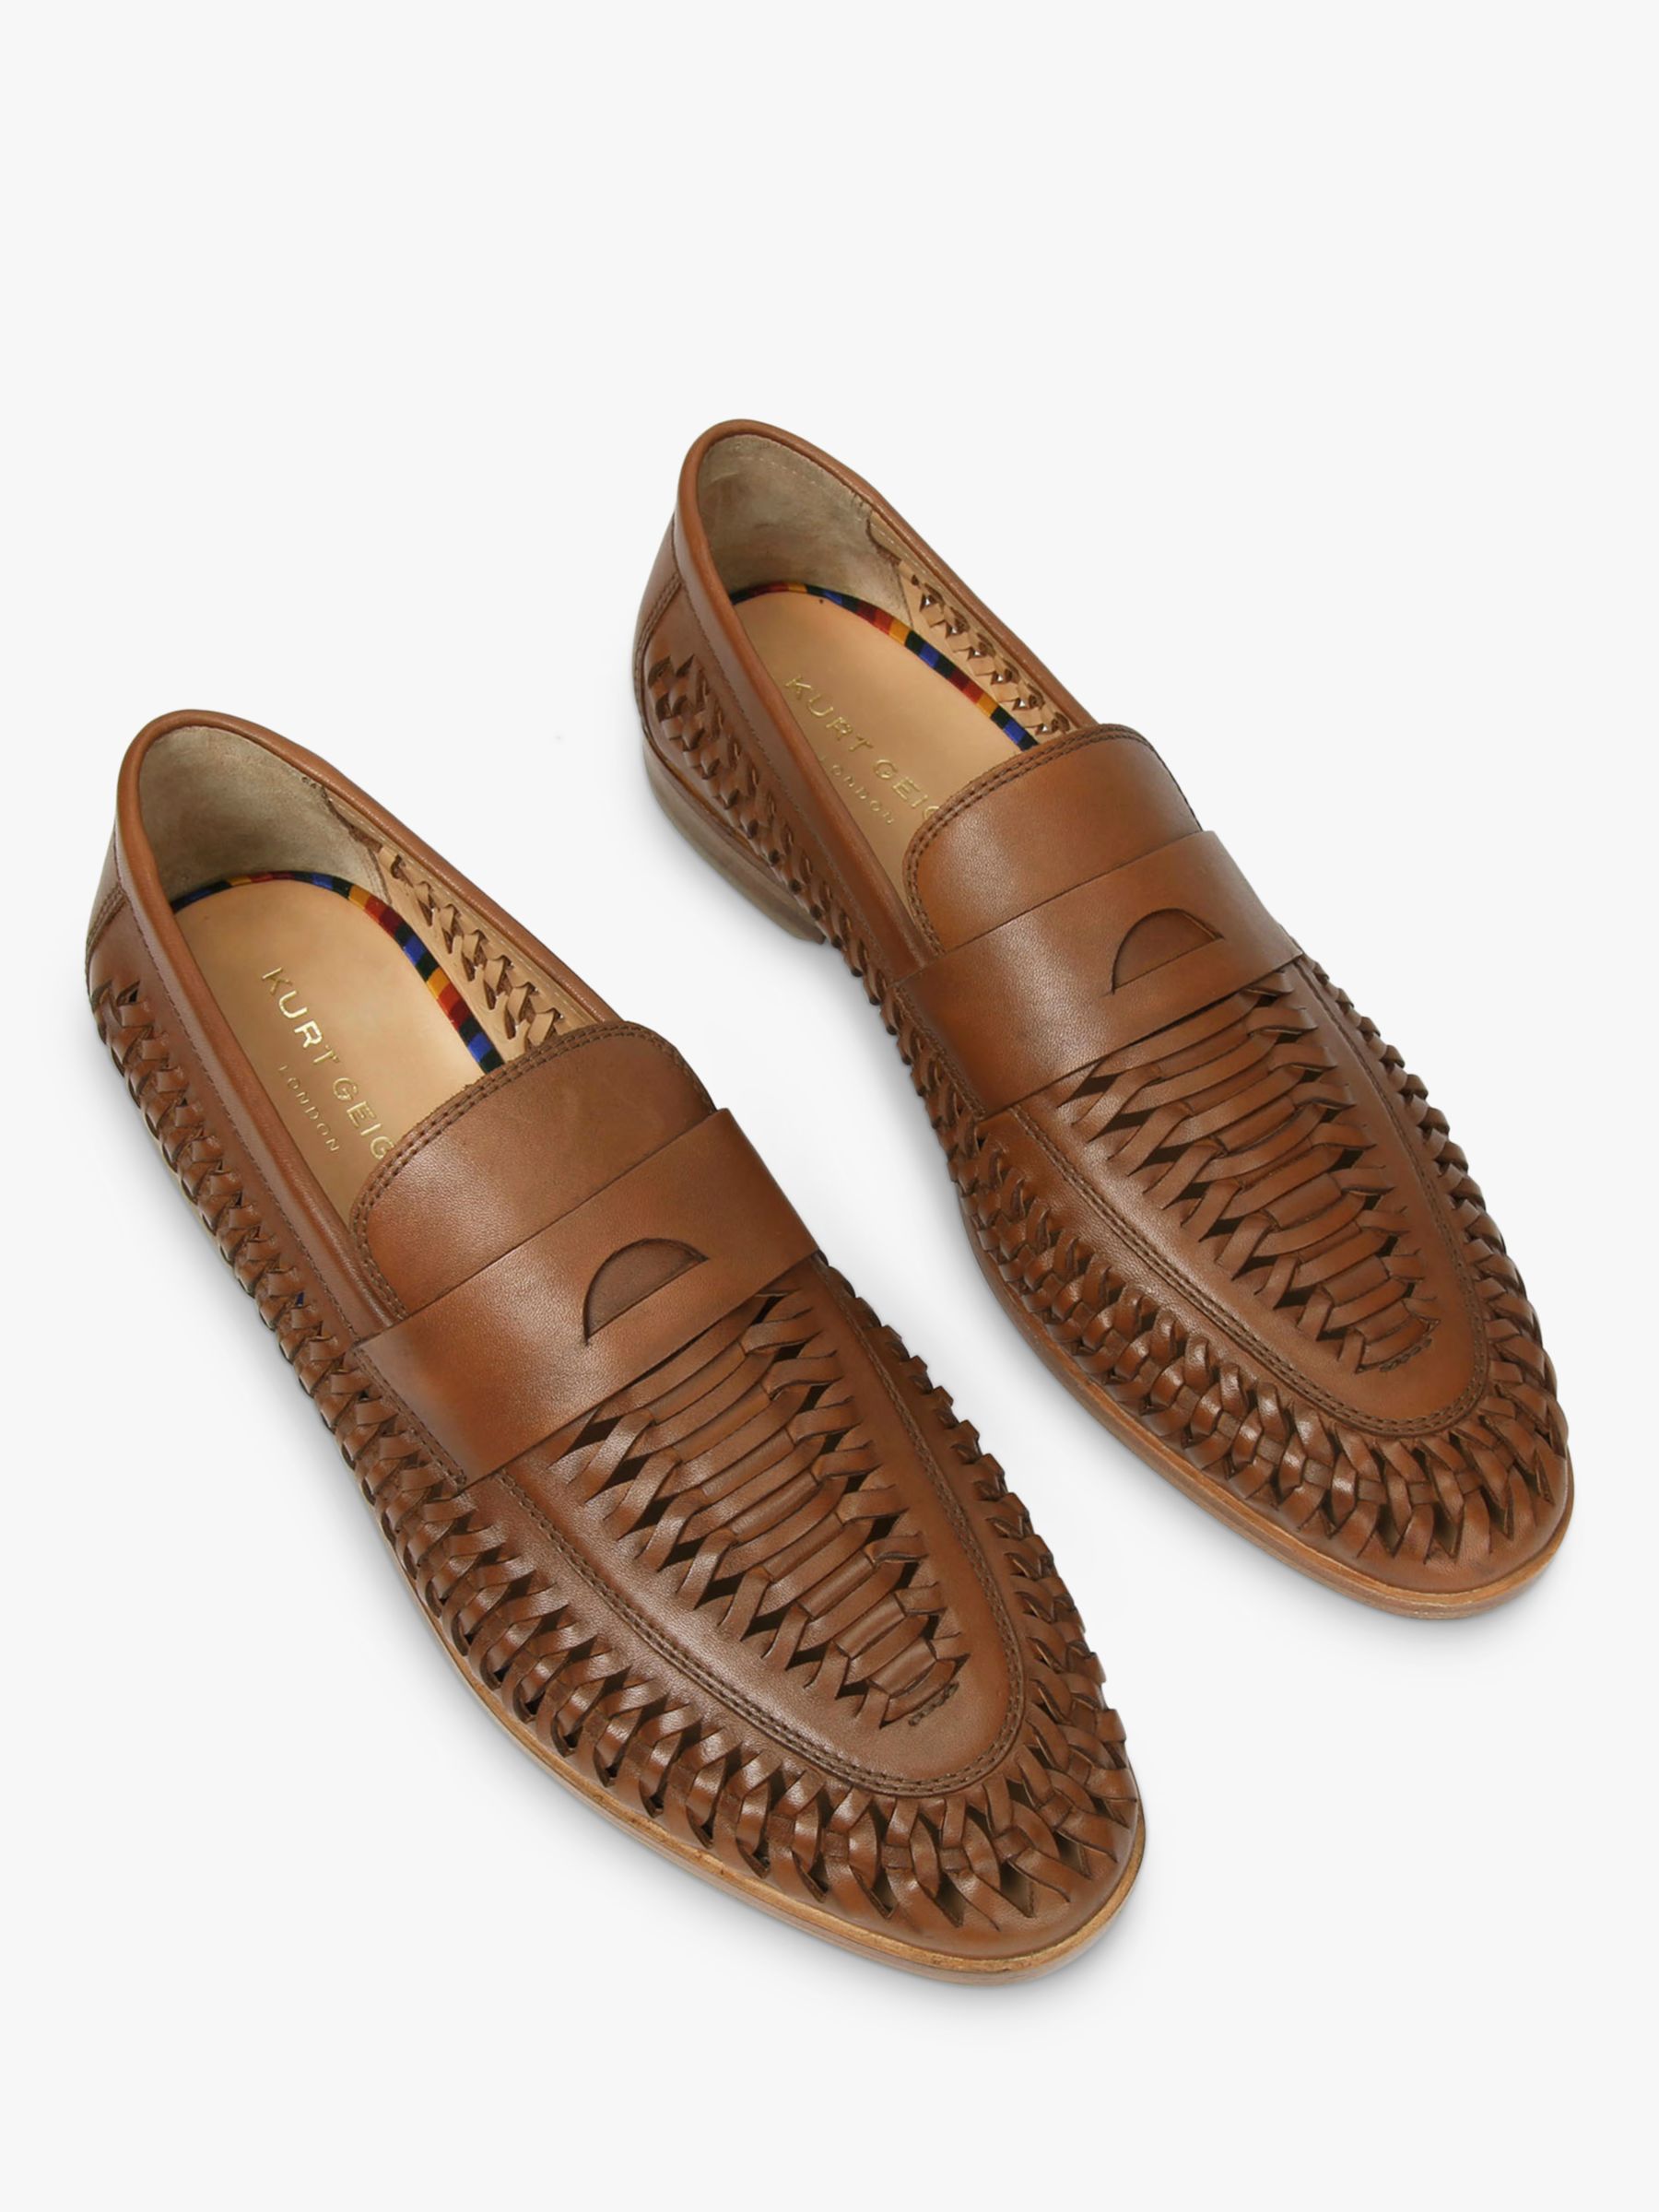 Buy Kurt Geiger London Pablo Woven Leather Loafers, Tan Online at johnlewis.com